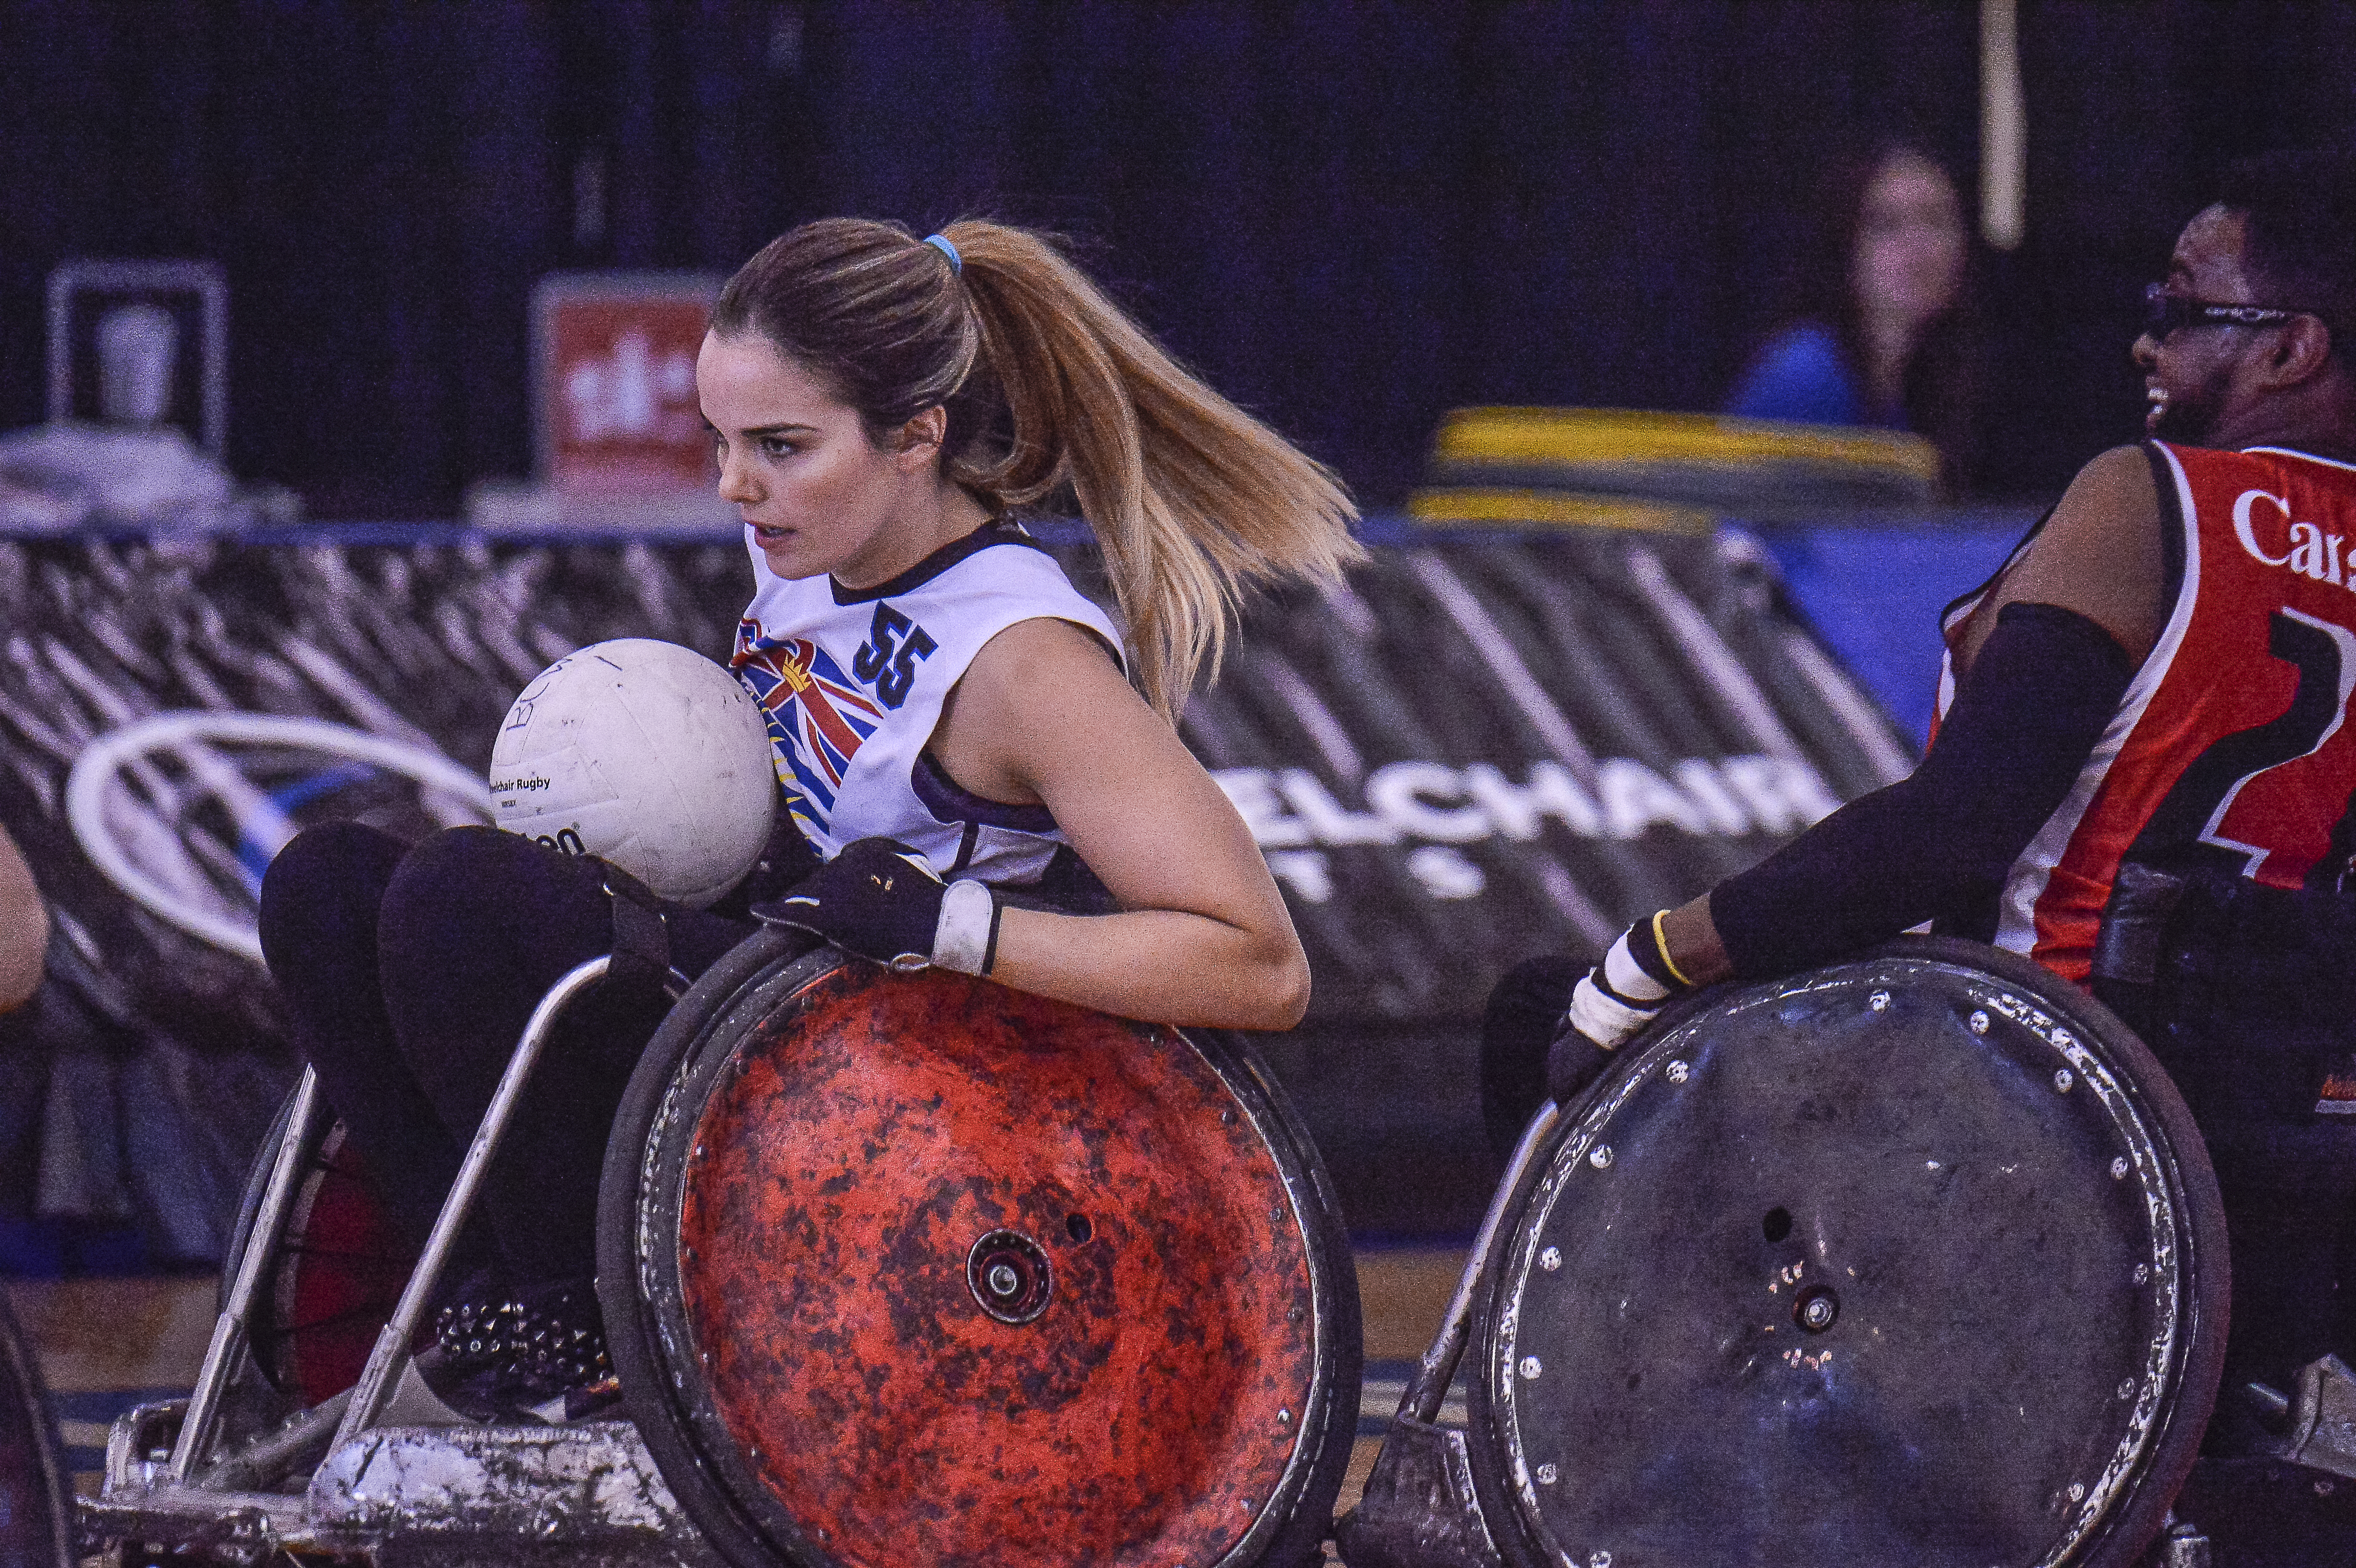 Women's Wheelchair Rugby player advancing her team